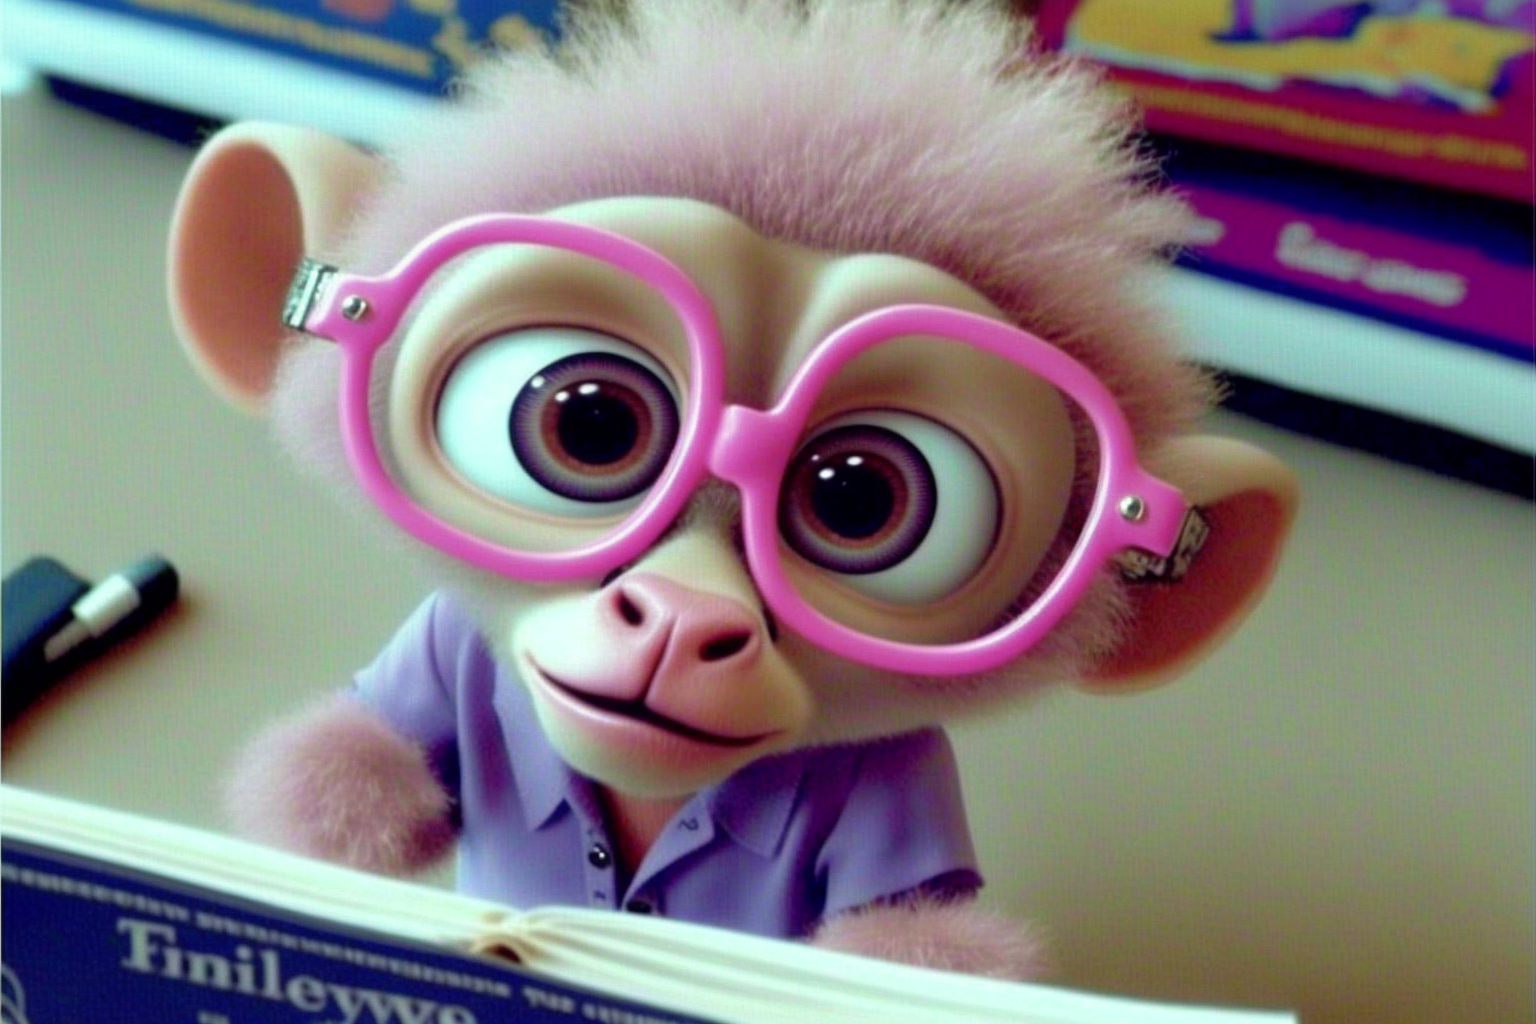 Toy monkey with pink glasses